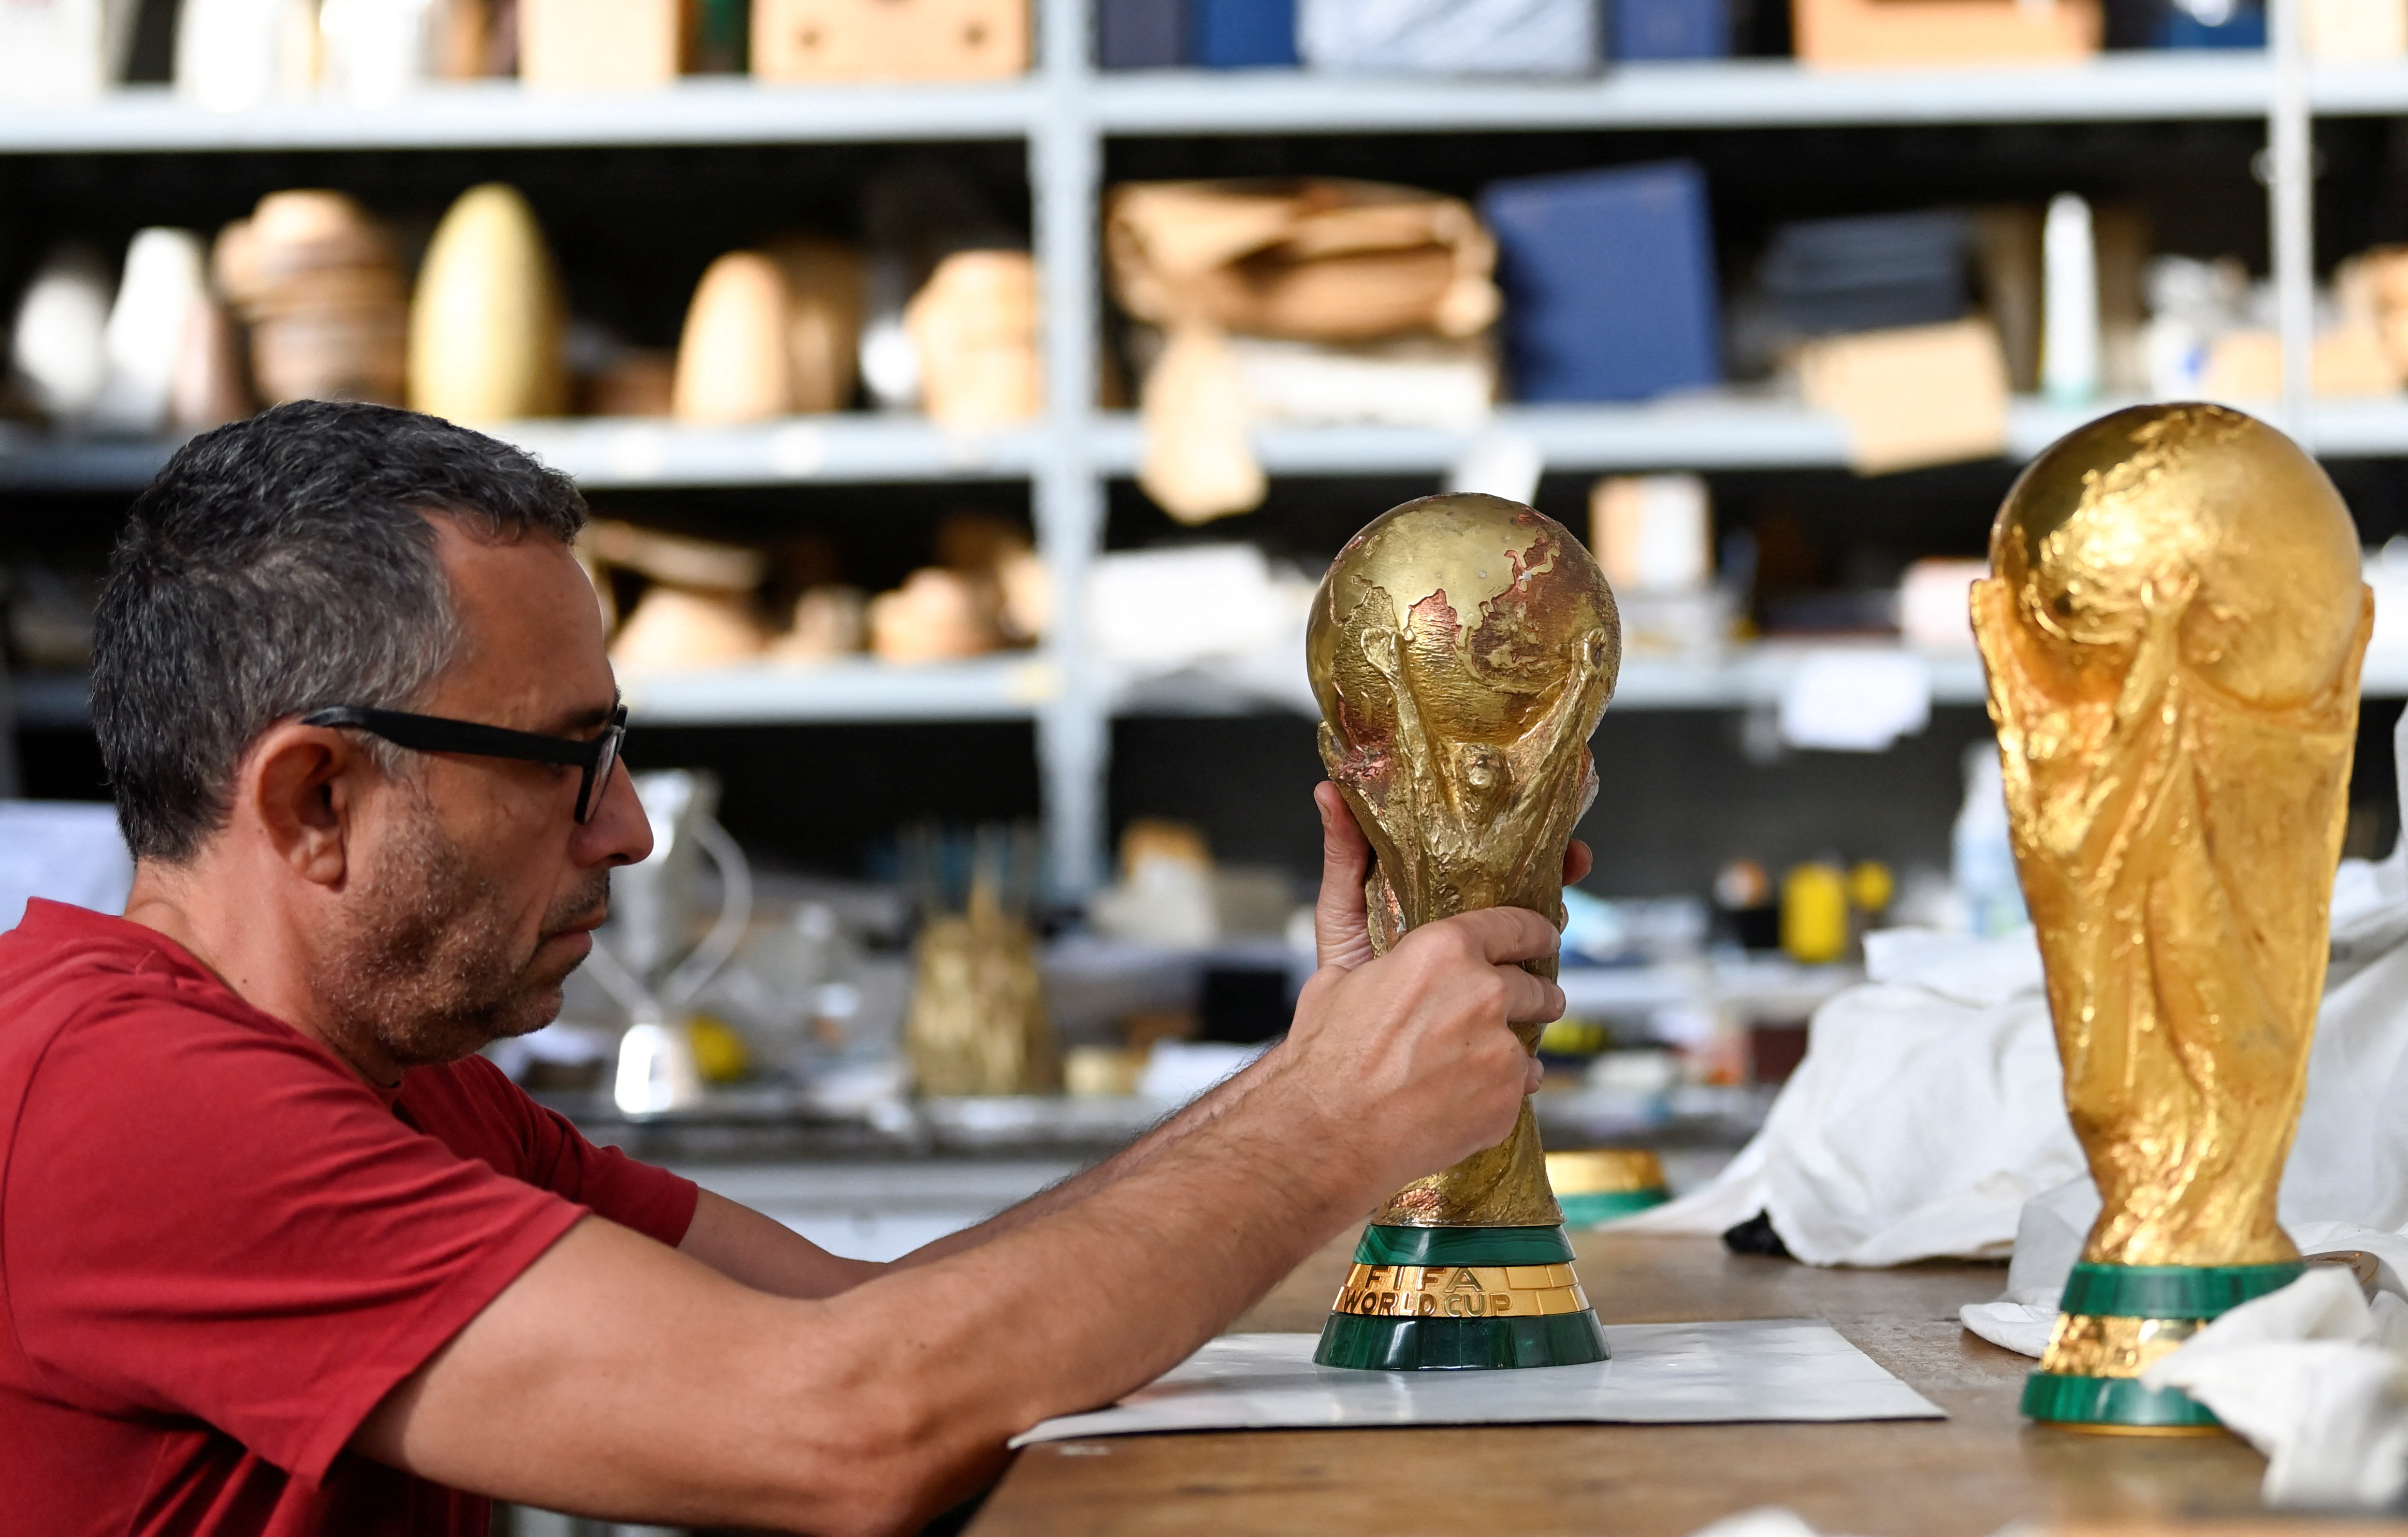 Coveted FIFA World Cup Trophy Is Made in a Small Factory in Milan, Italy